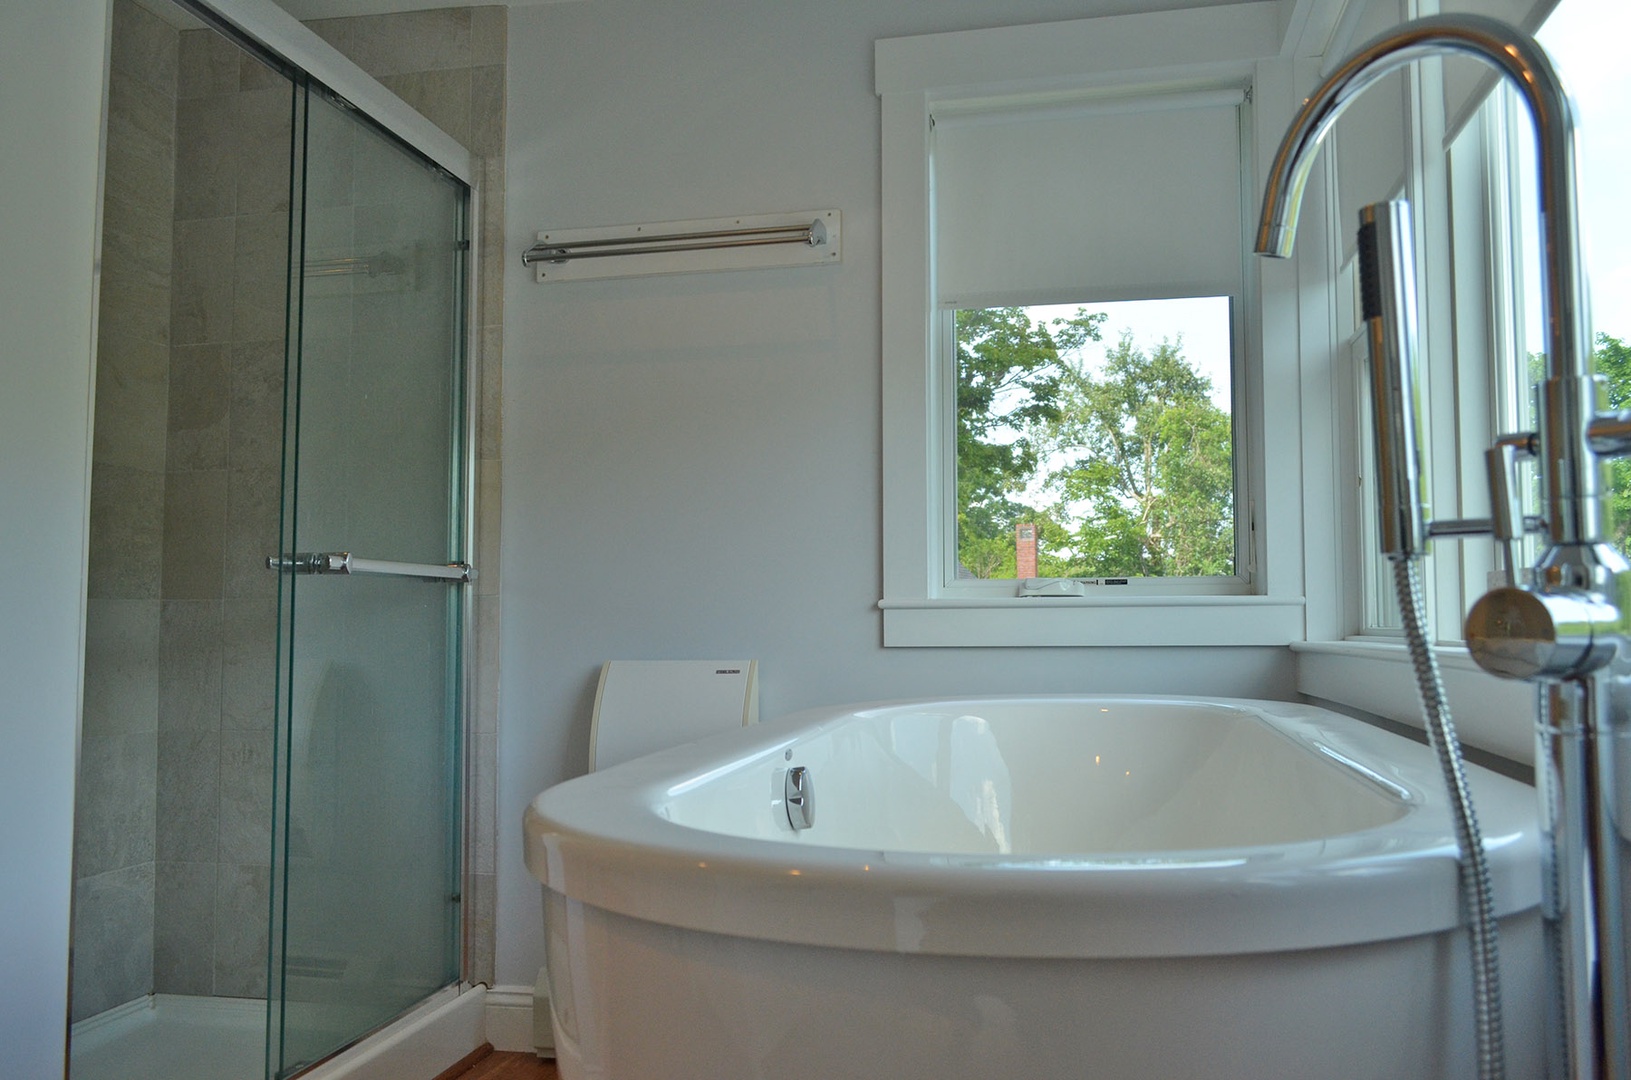 The Master bath features a soaking tub and walk-in shower.